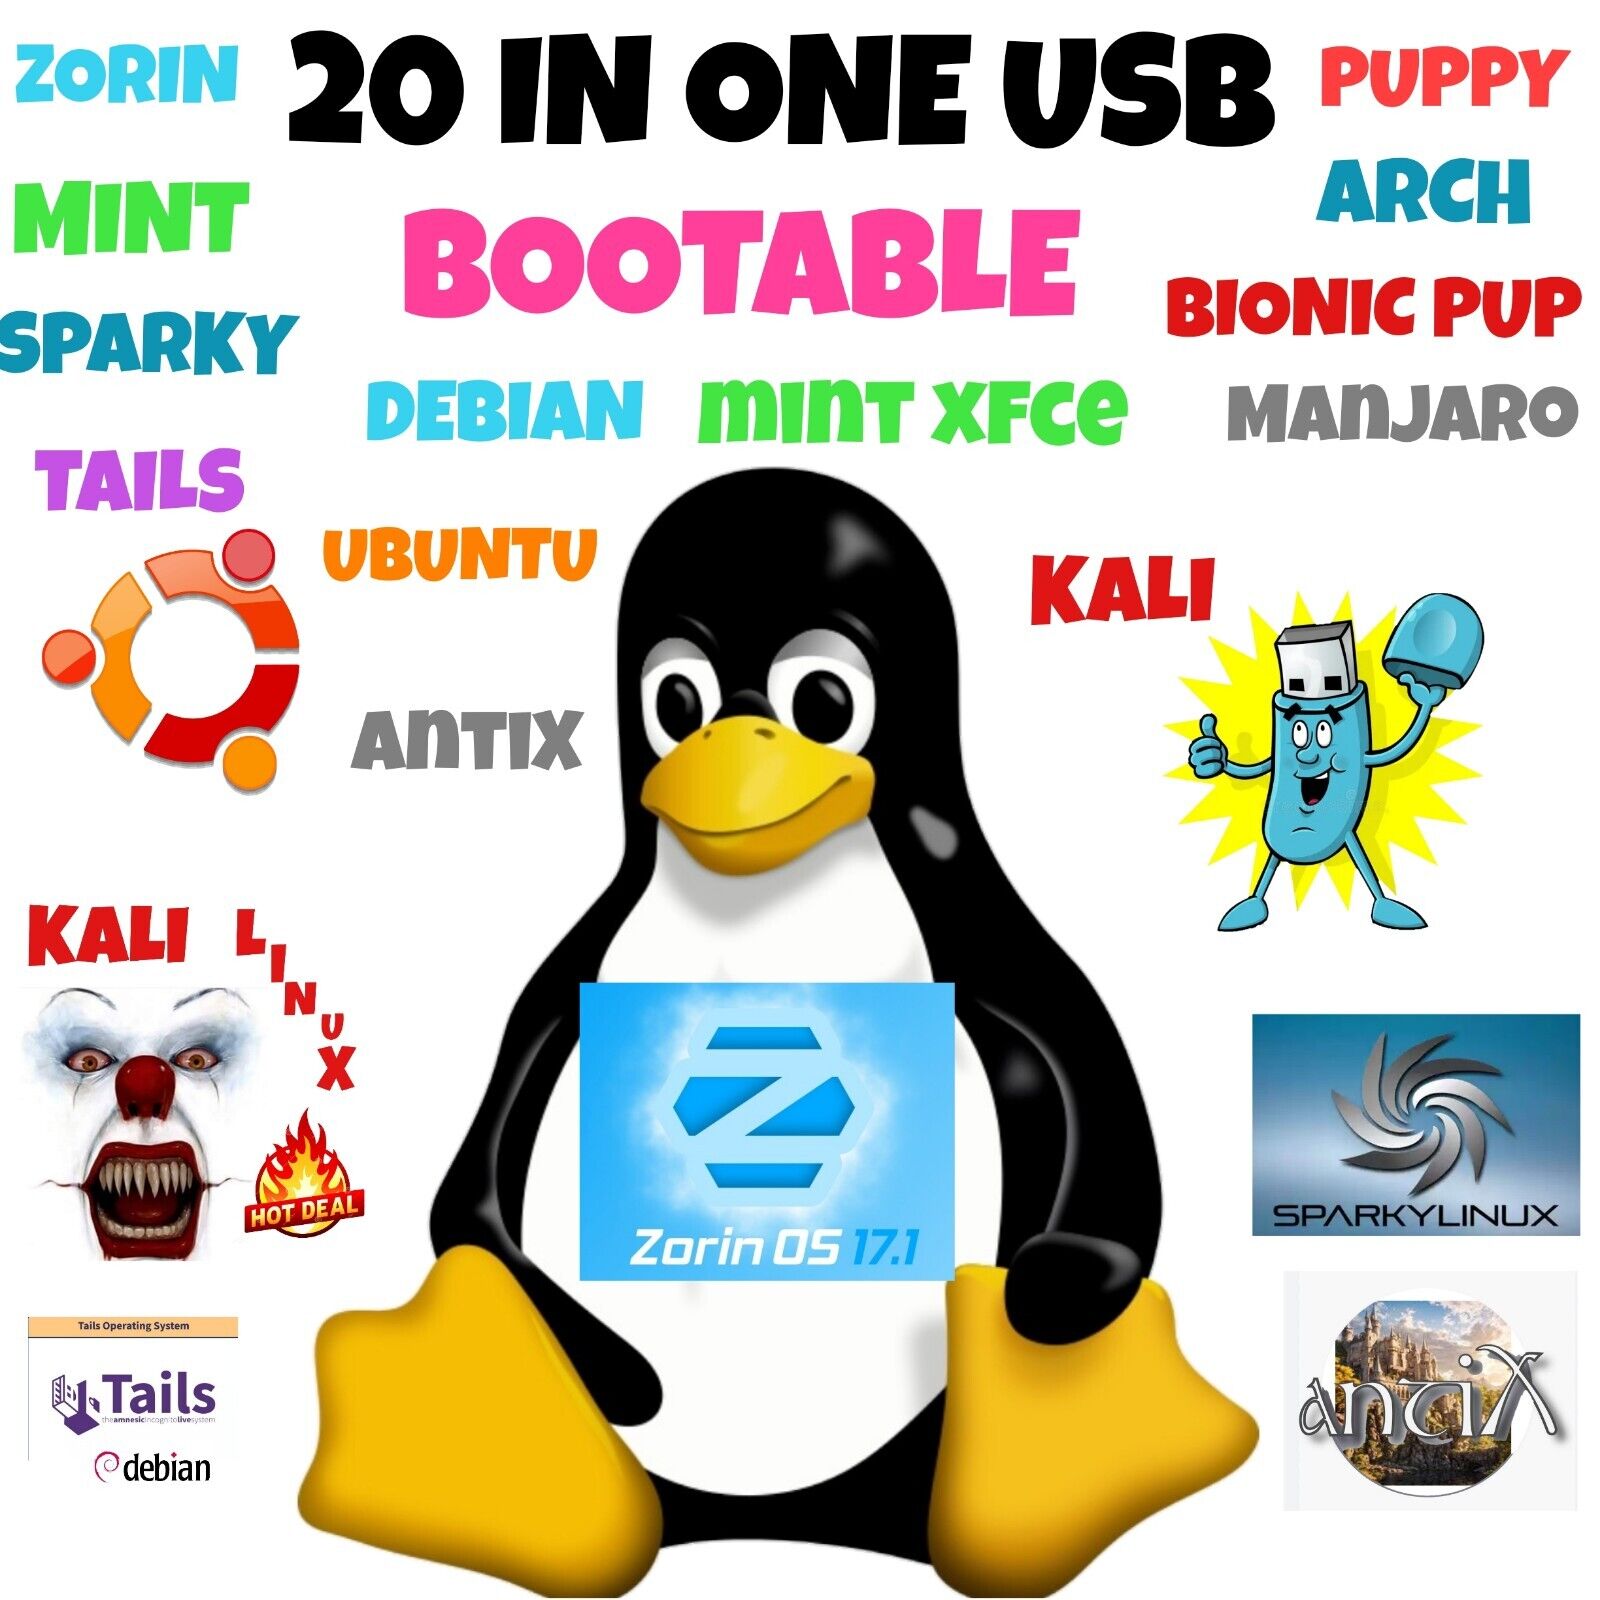 20 IN ONE LINUX OPERATING SYSTEMS ON ONE BOOTABLE 64 GB USB, ZORIN, MINT, TAILS